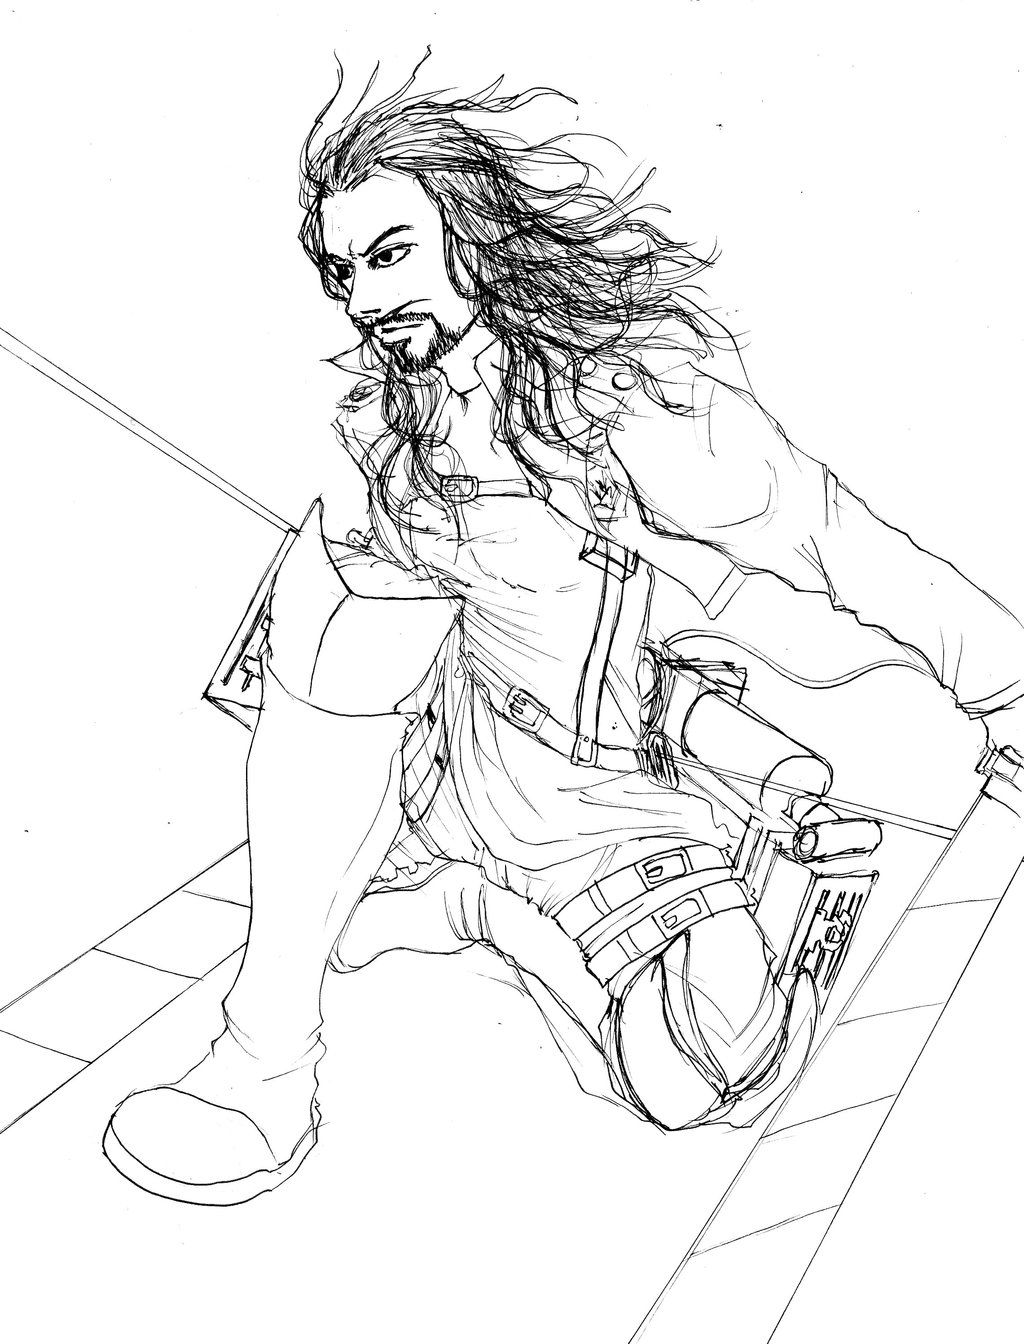 Attack On Justice :: Roman Reigns [Uncolor] by Tapla on DeviantArt